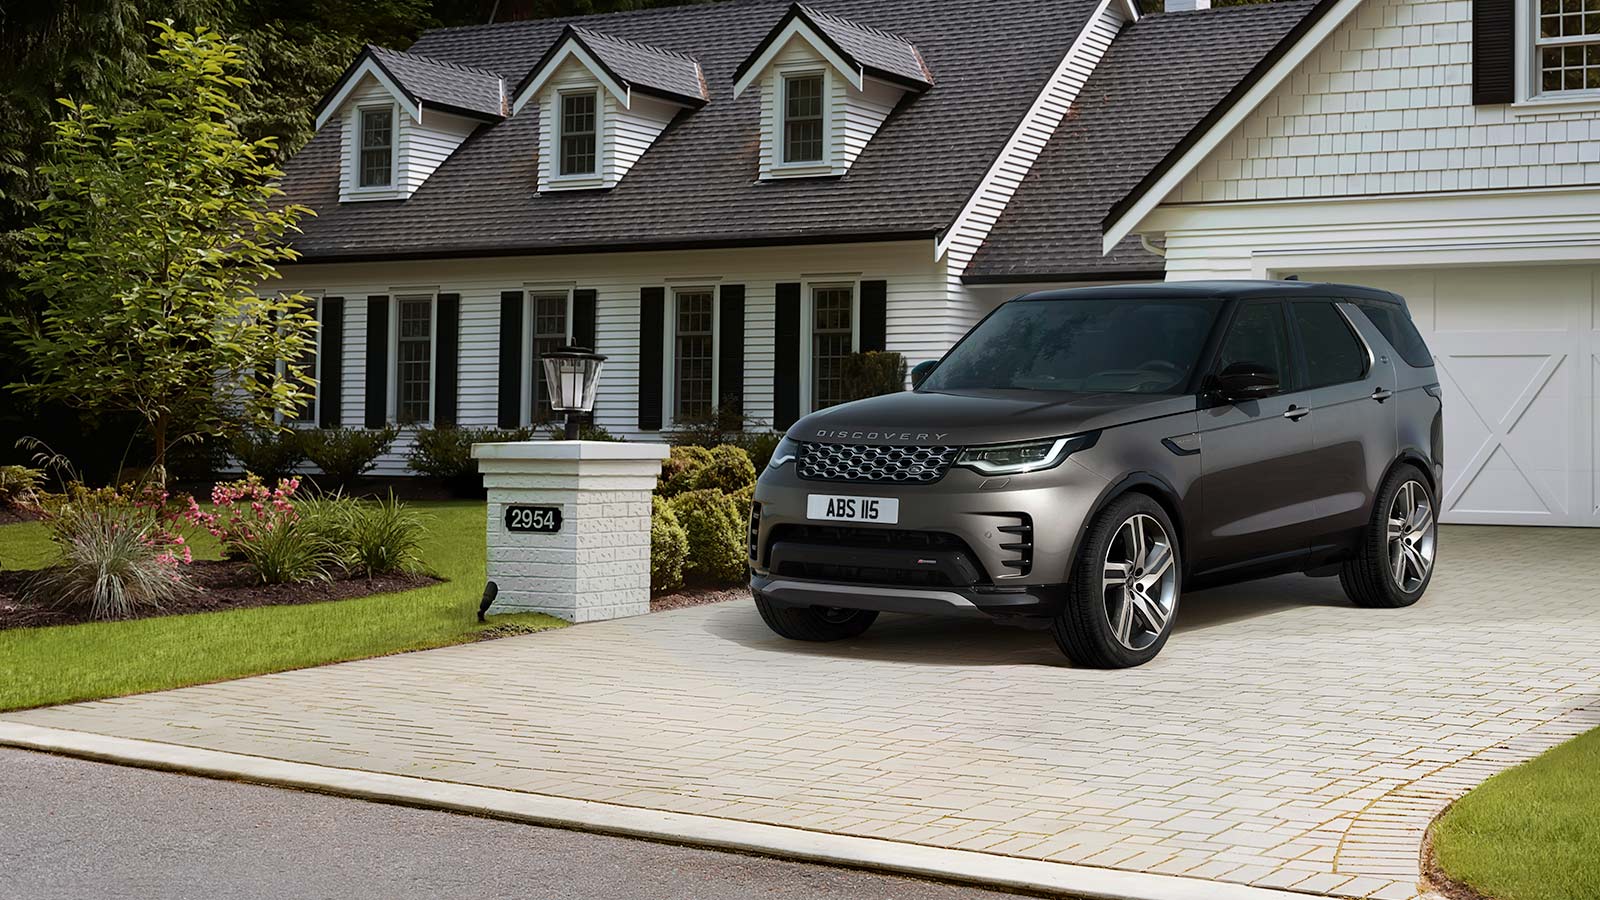 Grey Land Rover Discovery exterior front parked on a driveway